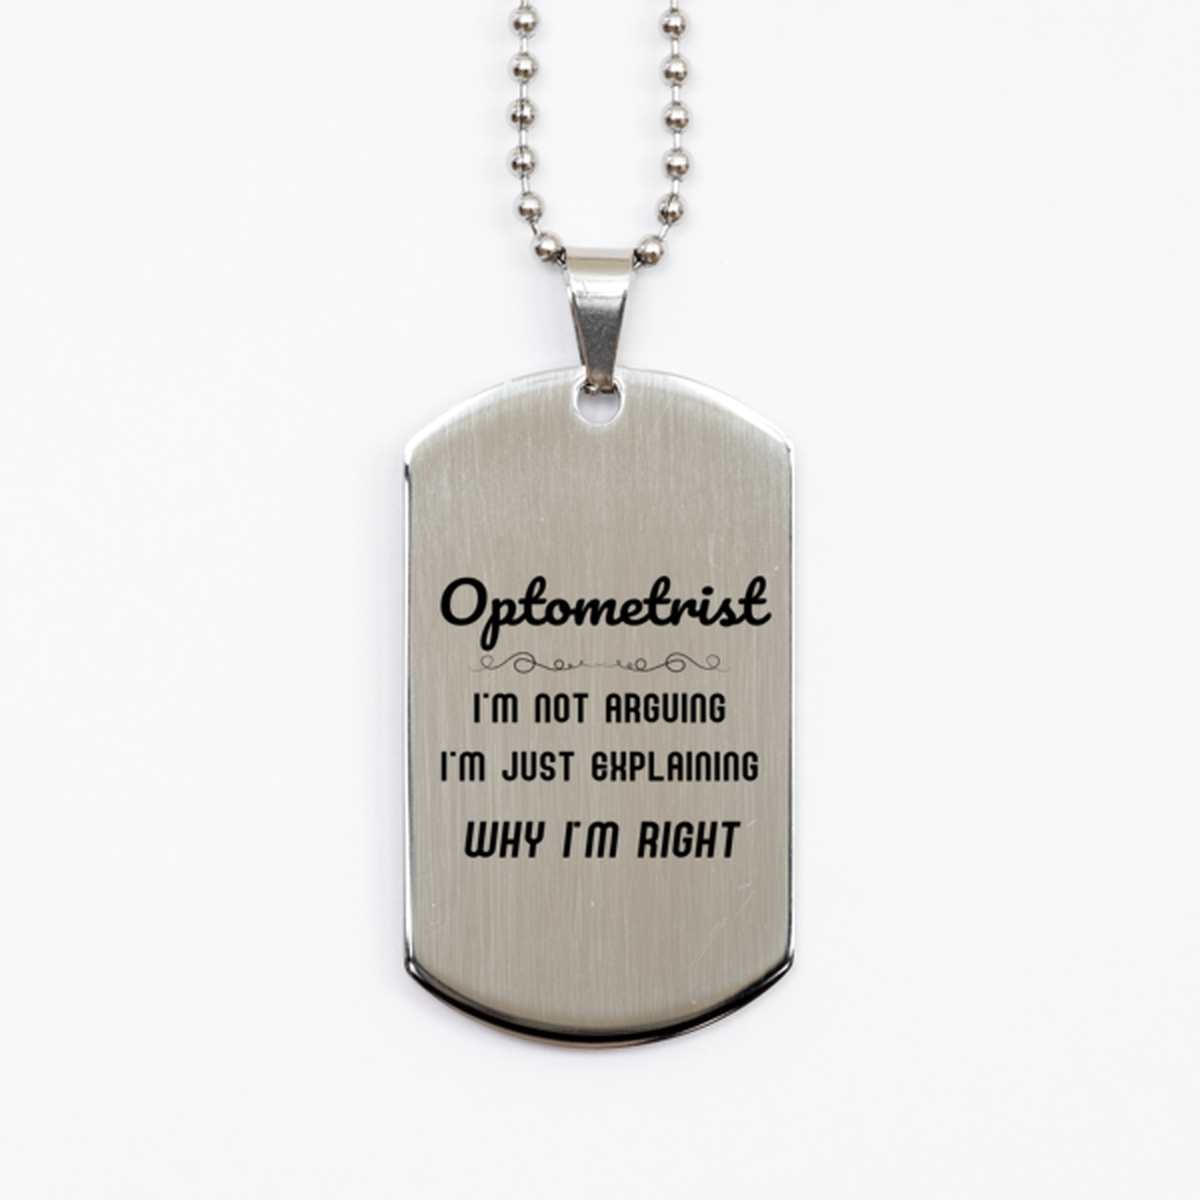 Optometrist I'm not Arguing. I'm Just Explaining Why I'm RIGHT Silver Dog Tag, Funny Saying Quote Optometrist Gifts For Optometrist Graduation Birthday Christmas Gifts for Men Women Coworker